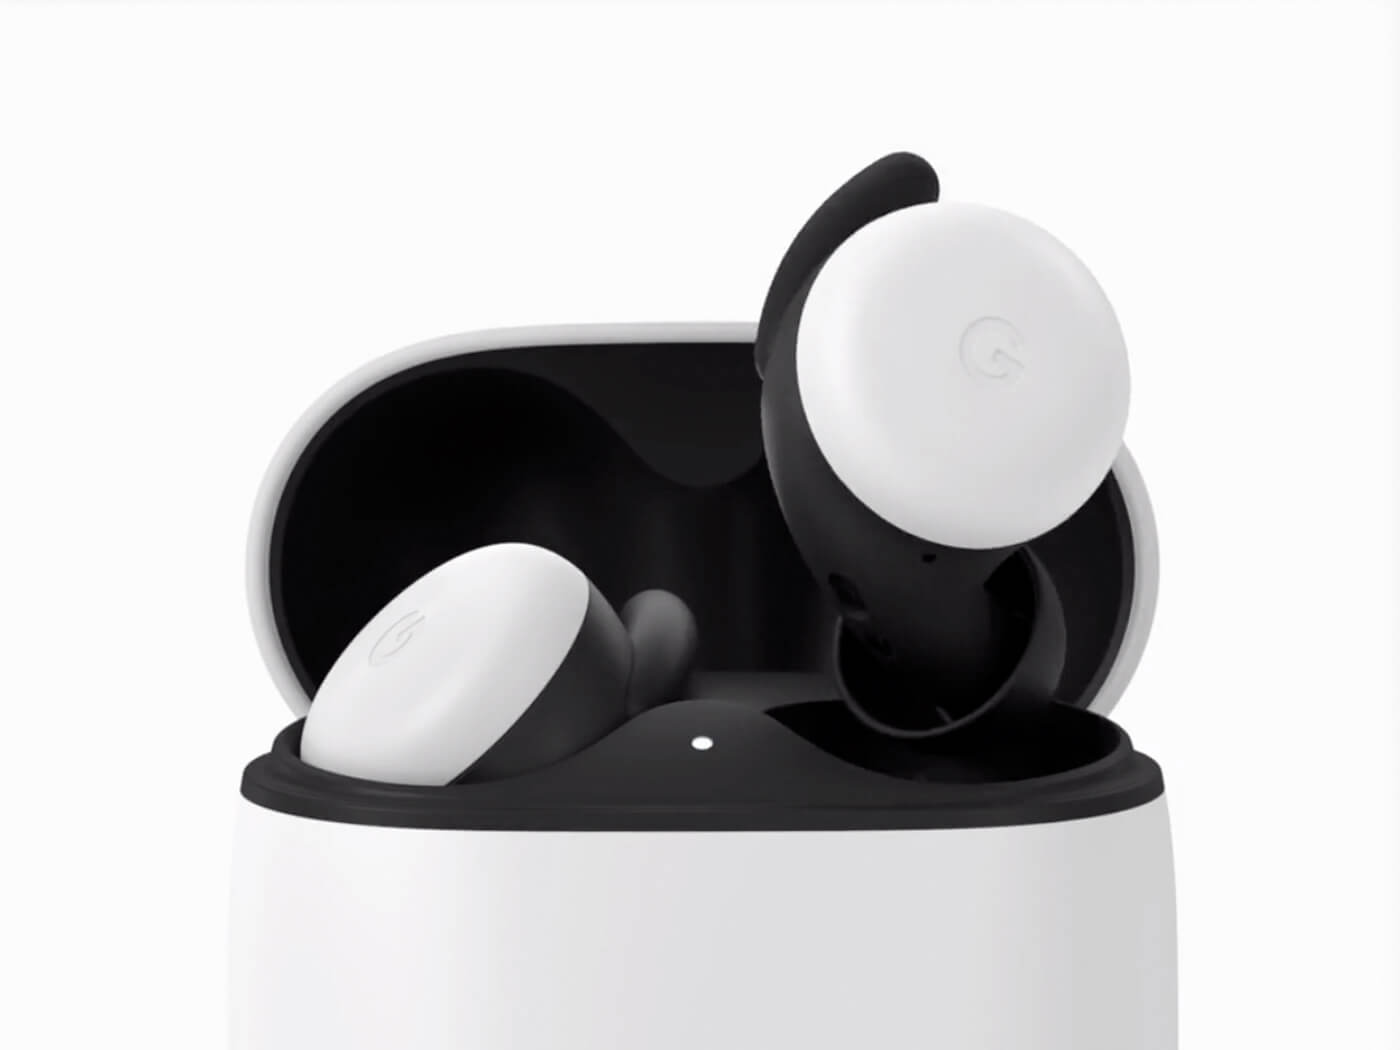 Google joins the wireless earbud game with new Pixel Buds | MusicTech